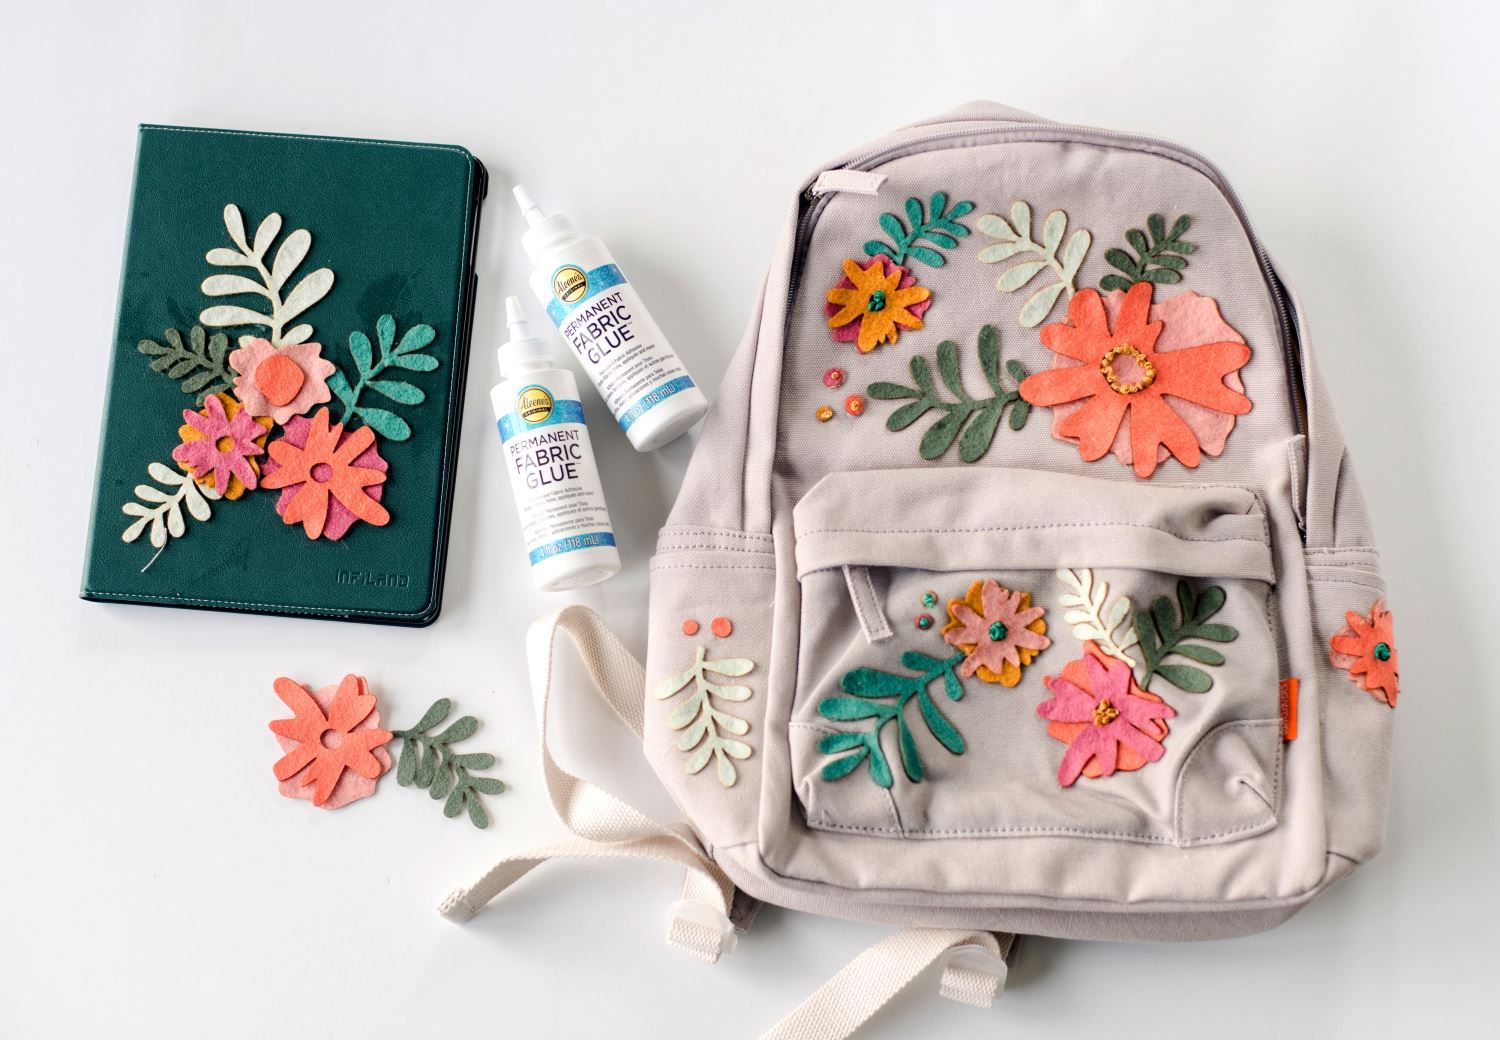 Aleene's Original Glues - Personalized Backpack and Tablet Case with Fabric  Glue